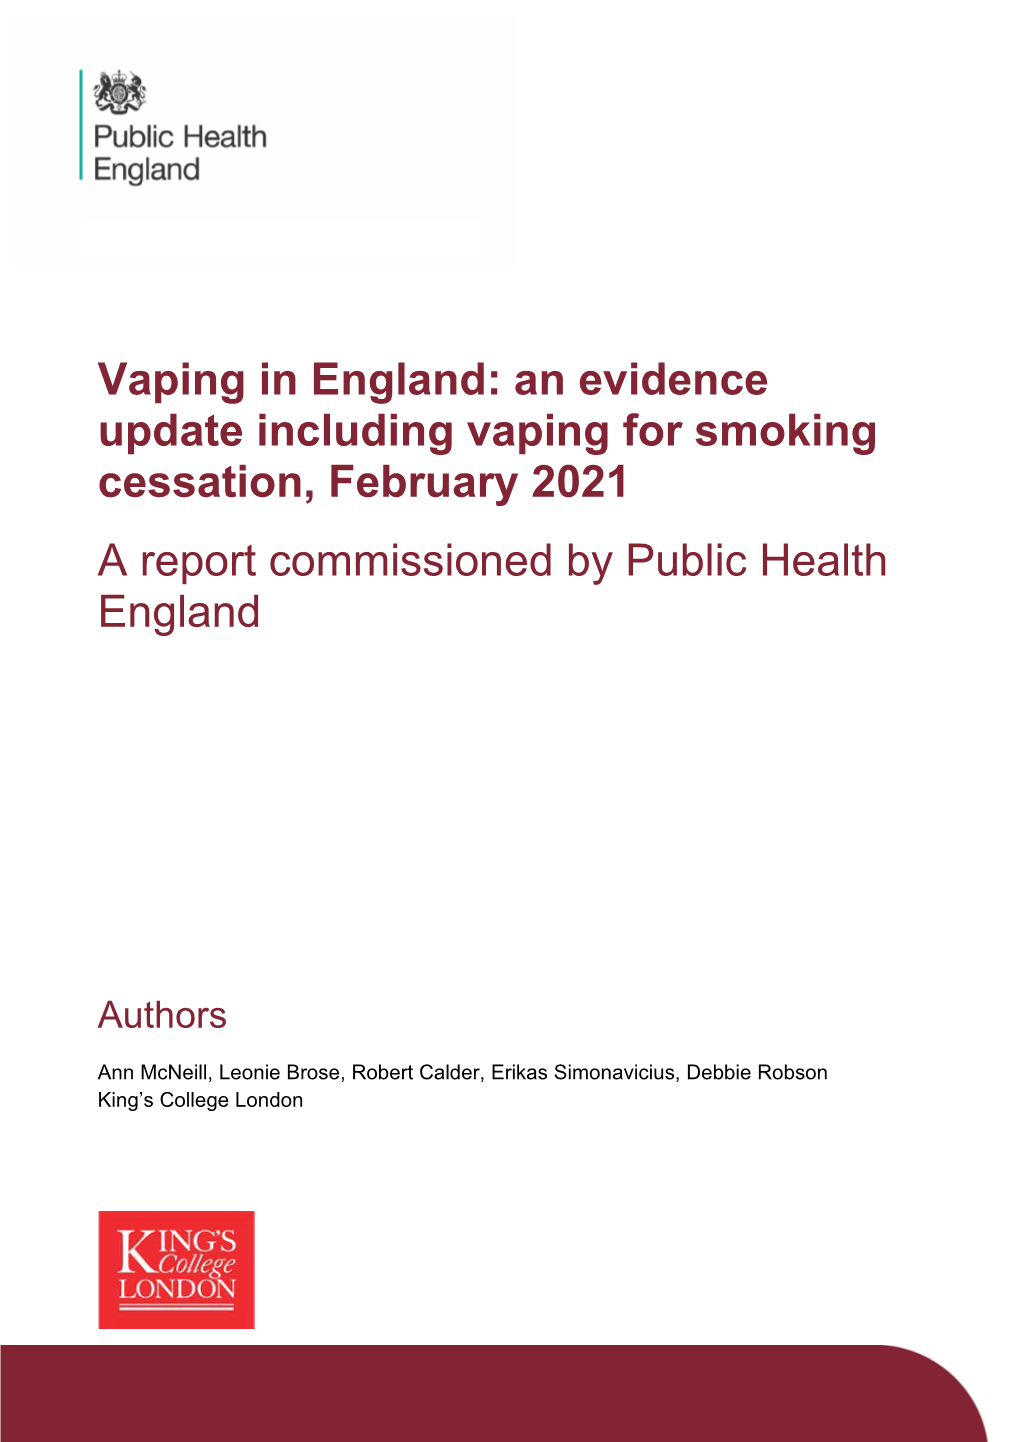 An Evidence Update Including Vaping for Smoking Cessation, February 2021